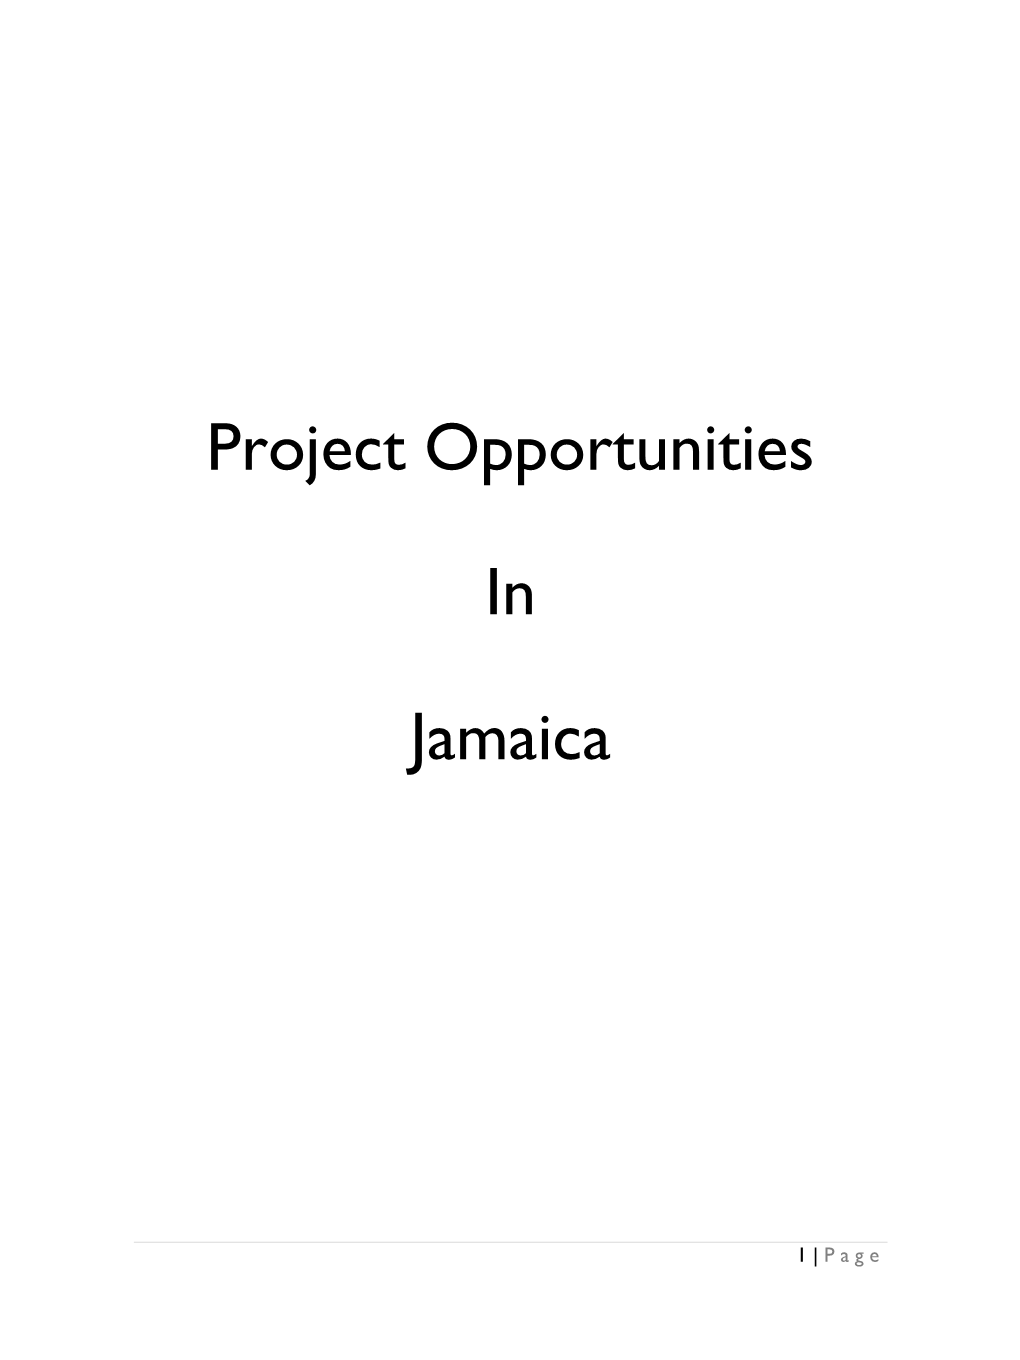 Project Opportunities in Jamaica